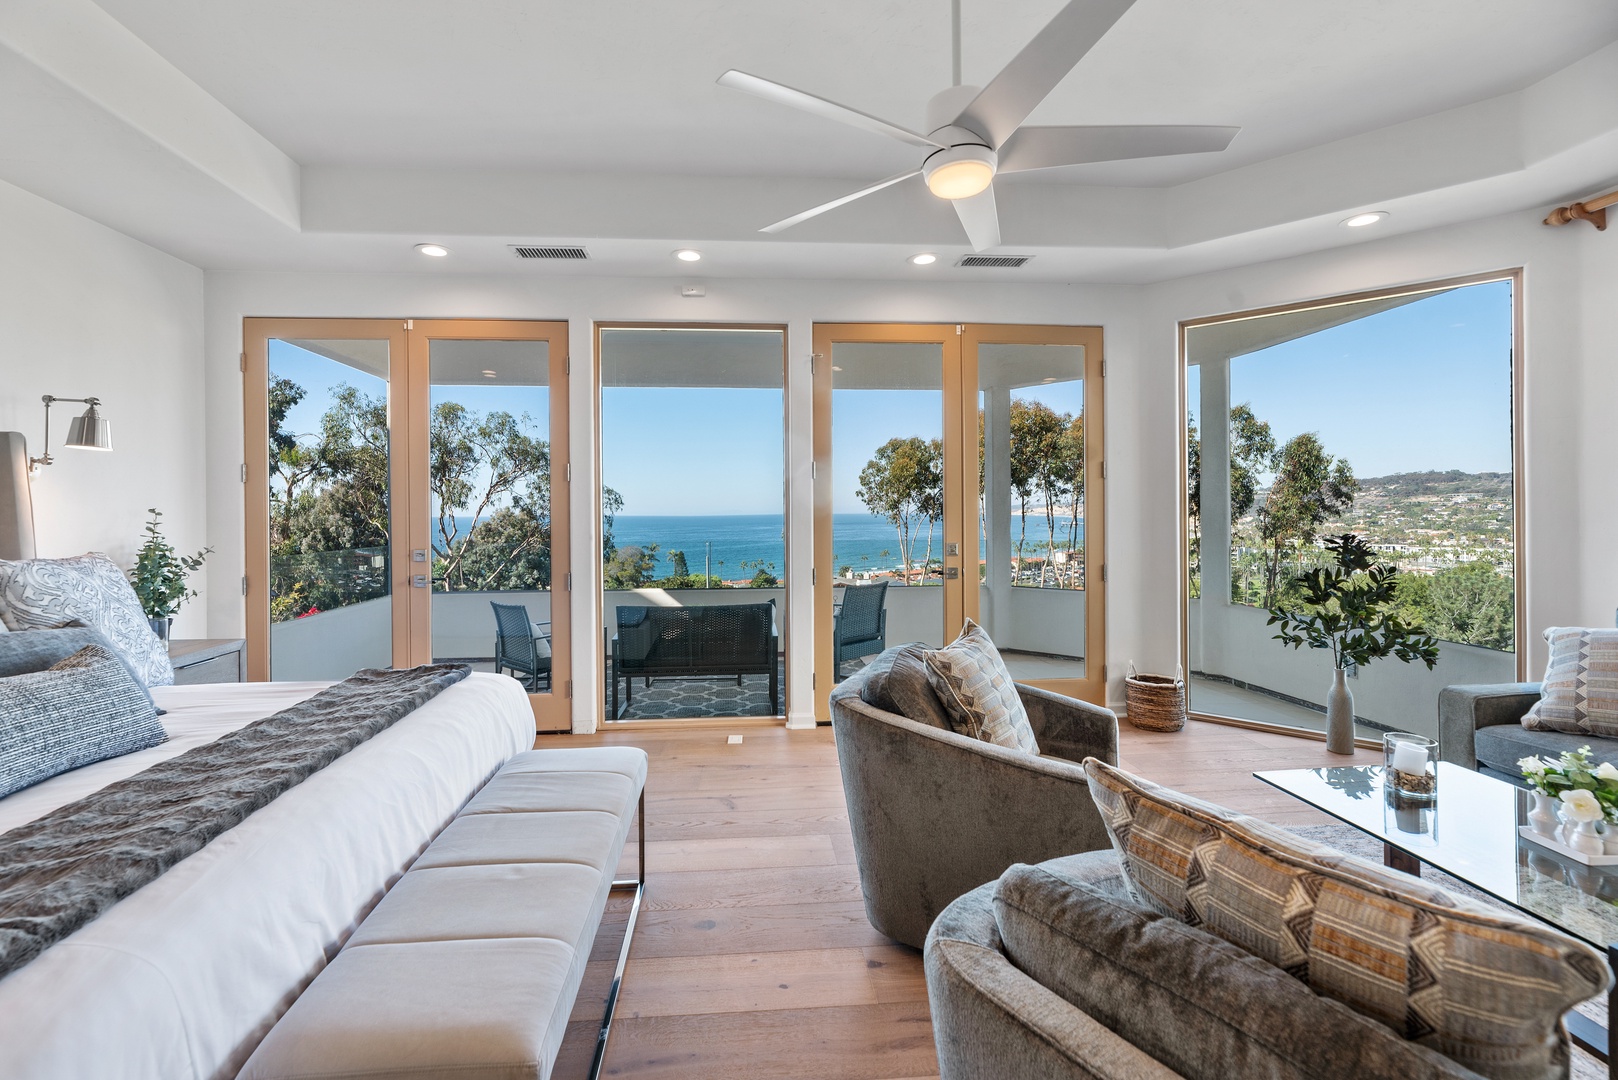 La Jolla Vacation Rentals, Coastal Lookout - Primary bedroom with spacious seating area and private balcony with full ocean view